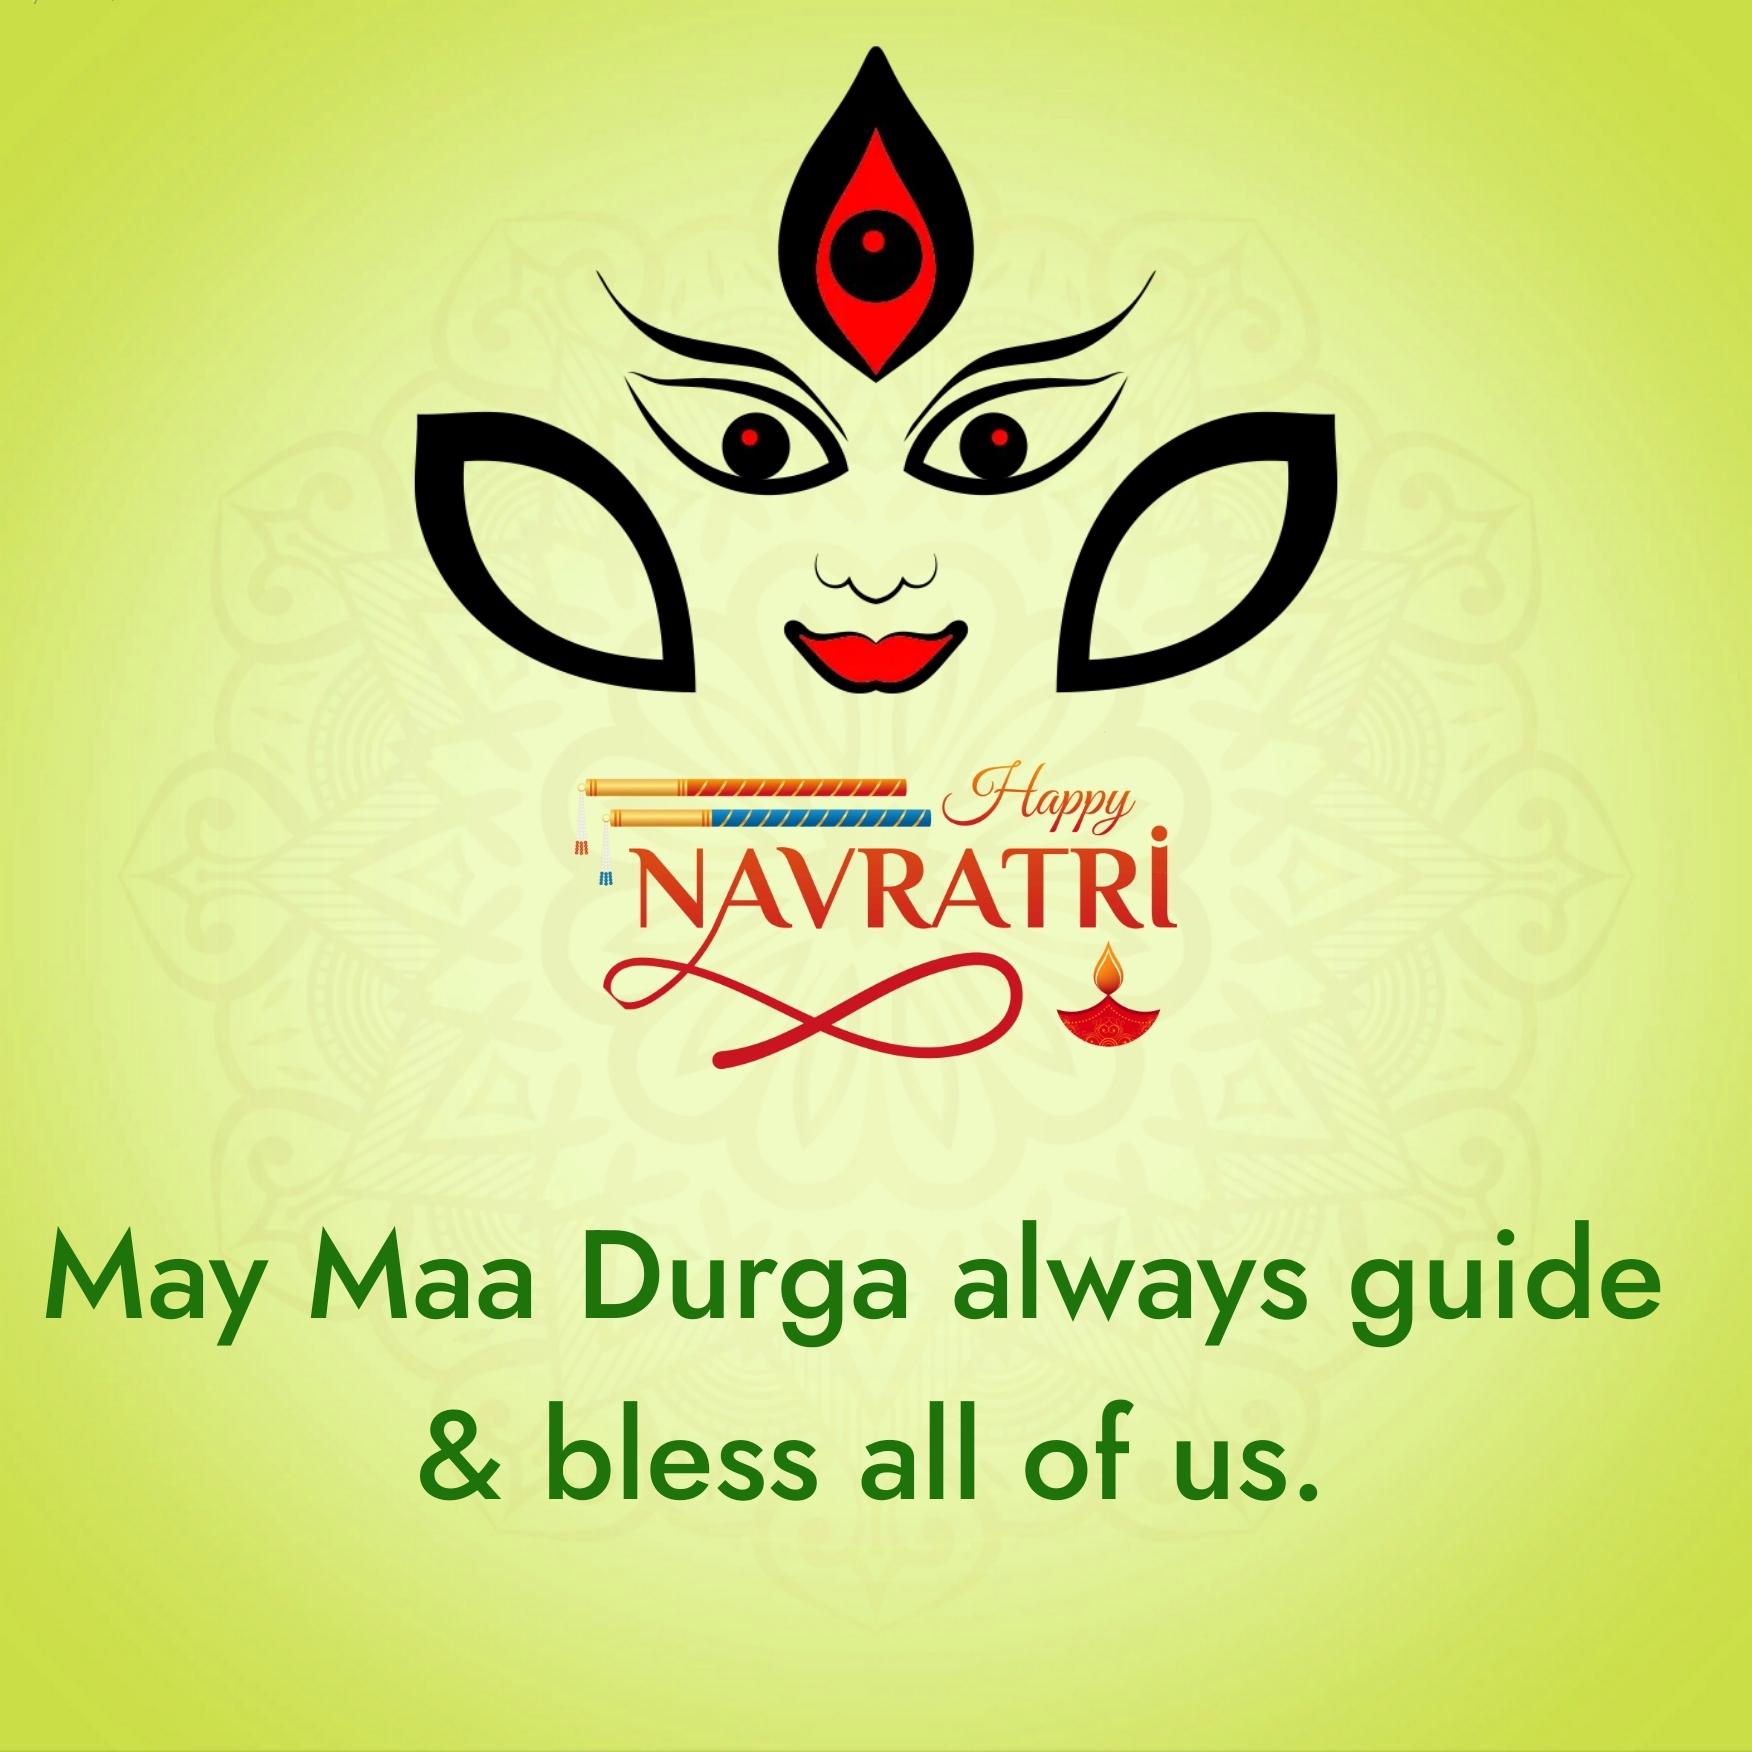 May Maa Durga always guide and bless all of us